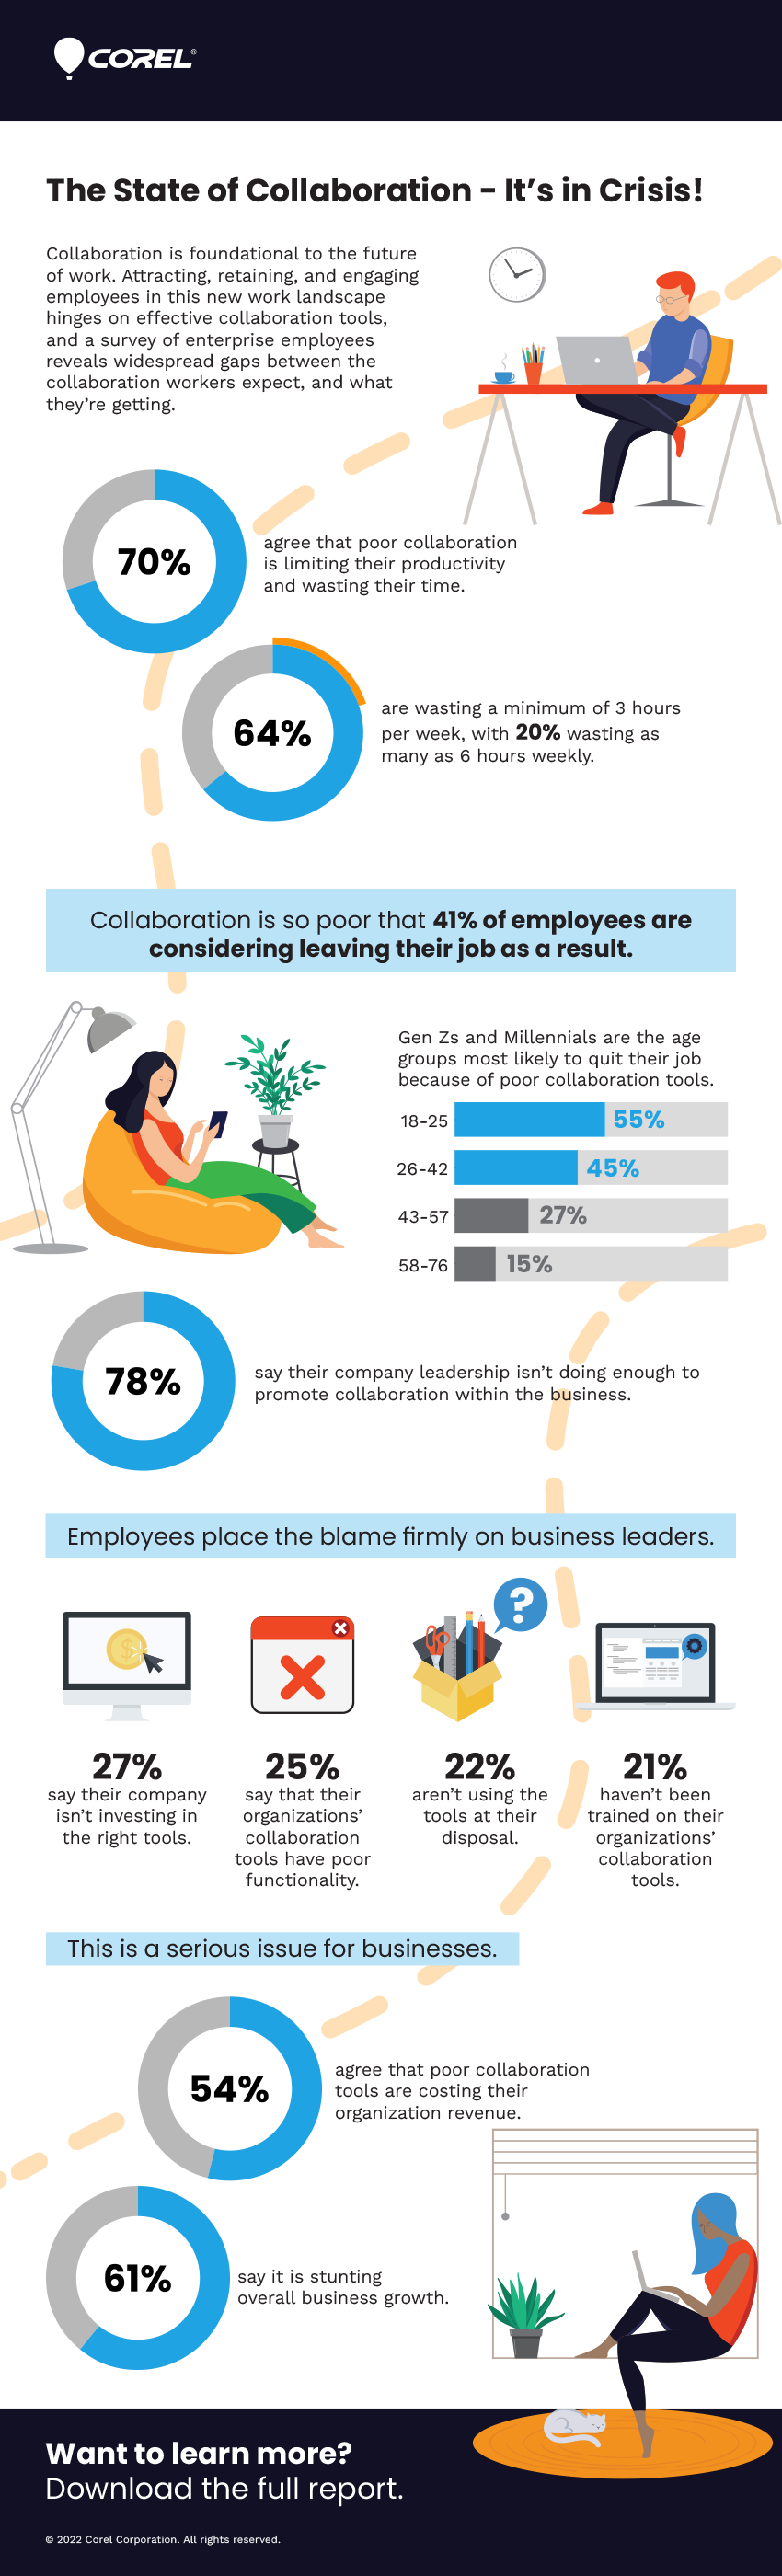 The State of Collaboration - It's in Crisis!